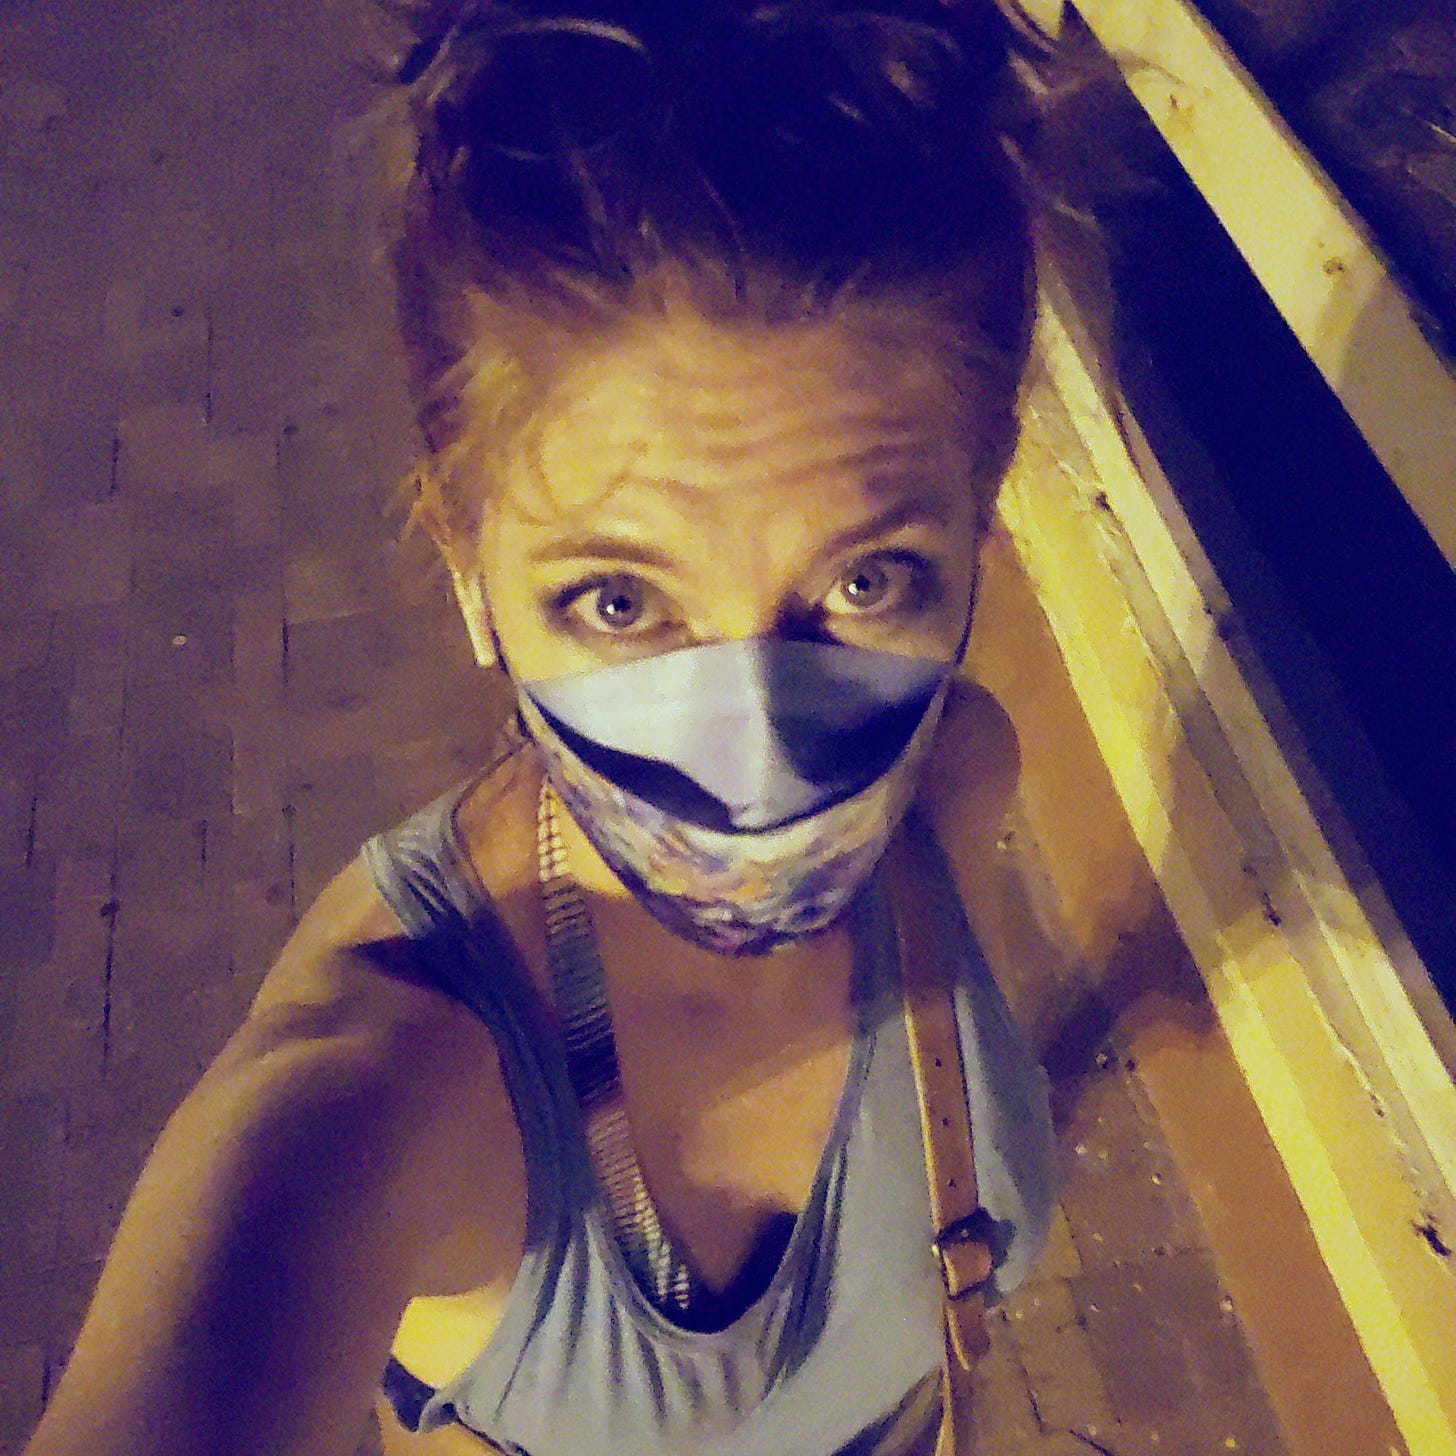 White woman in a mask and blue tank top staring up at the camera at night.  